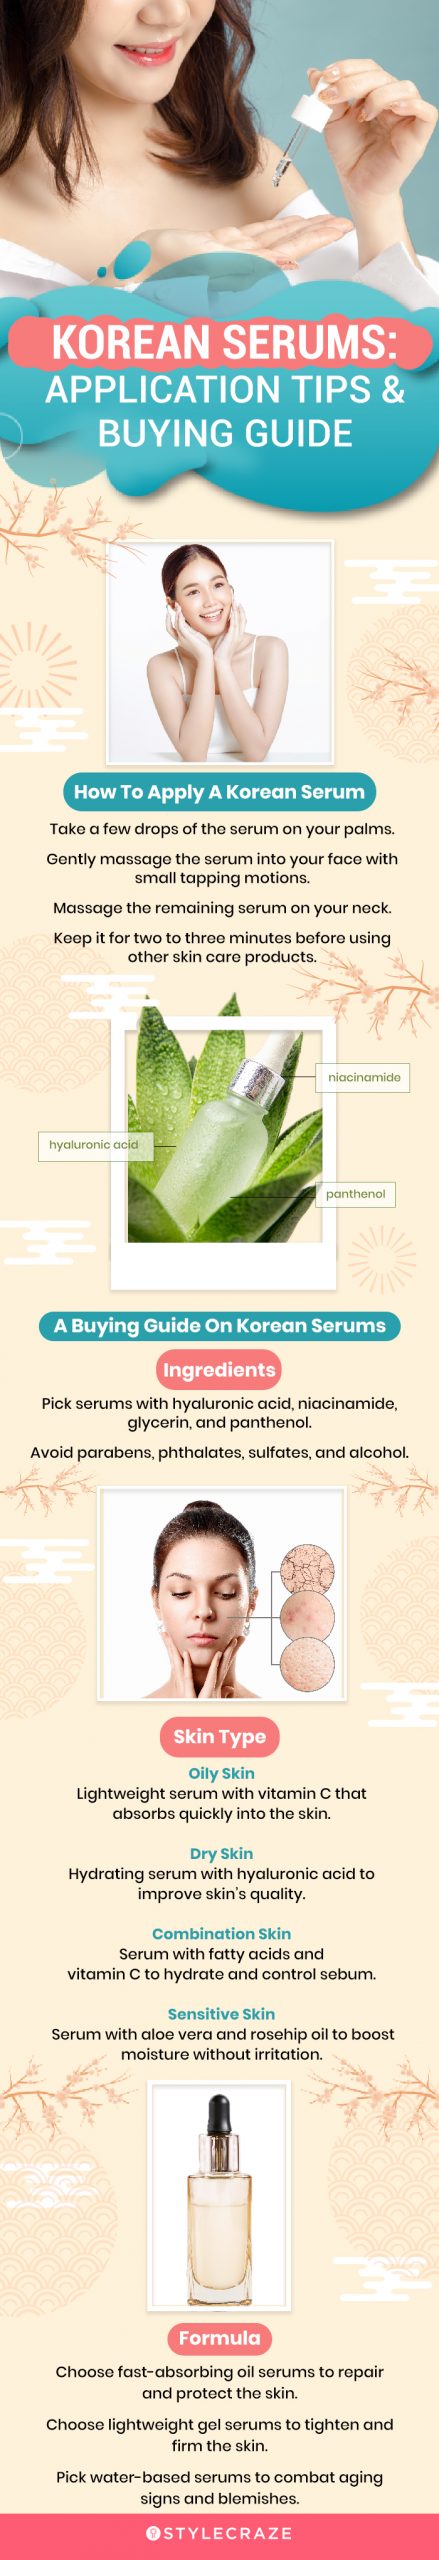 Korean Serums: Application Tips & Buying Guide (infographic)